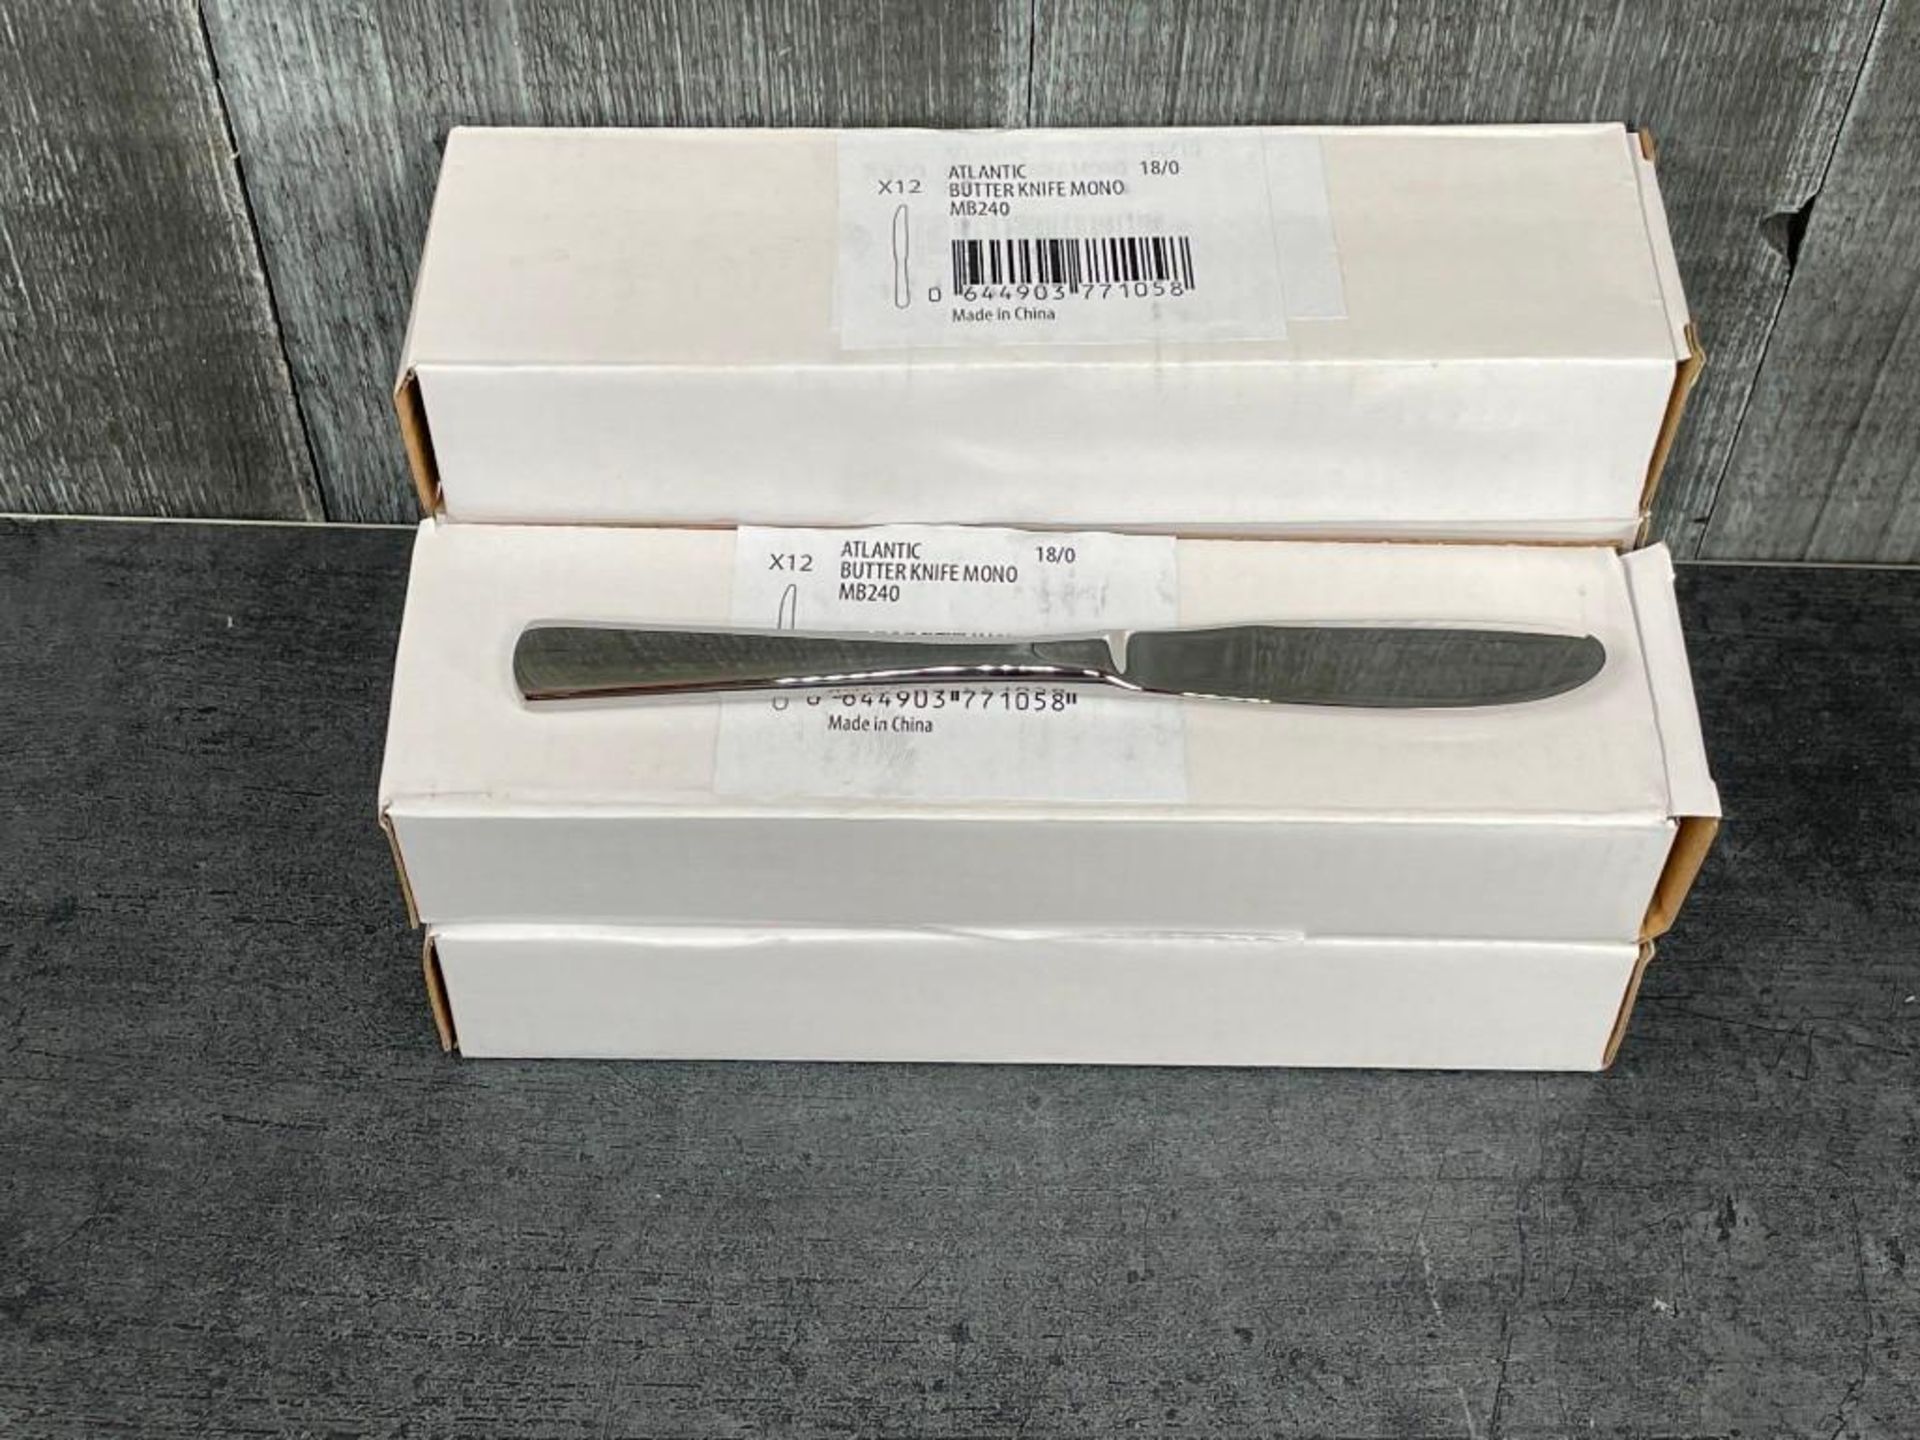 ATLANTIC HEAVY WEIGHT BUTTER KNIVES, SOLA MB240 - LOT OF 60 (5 BOXES) - Image 4 of 4